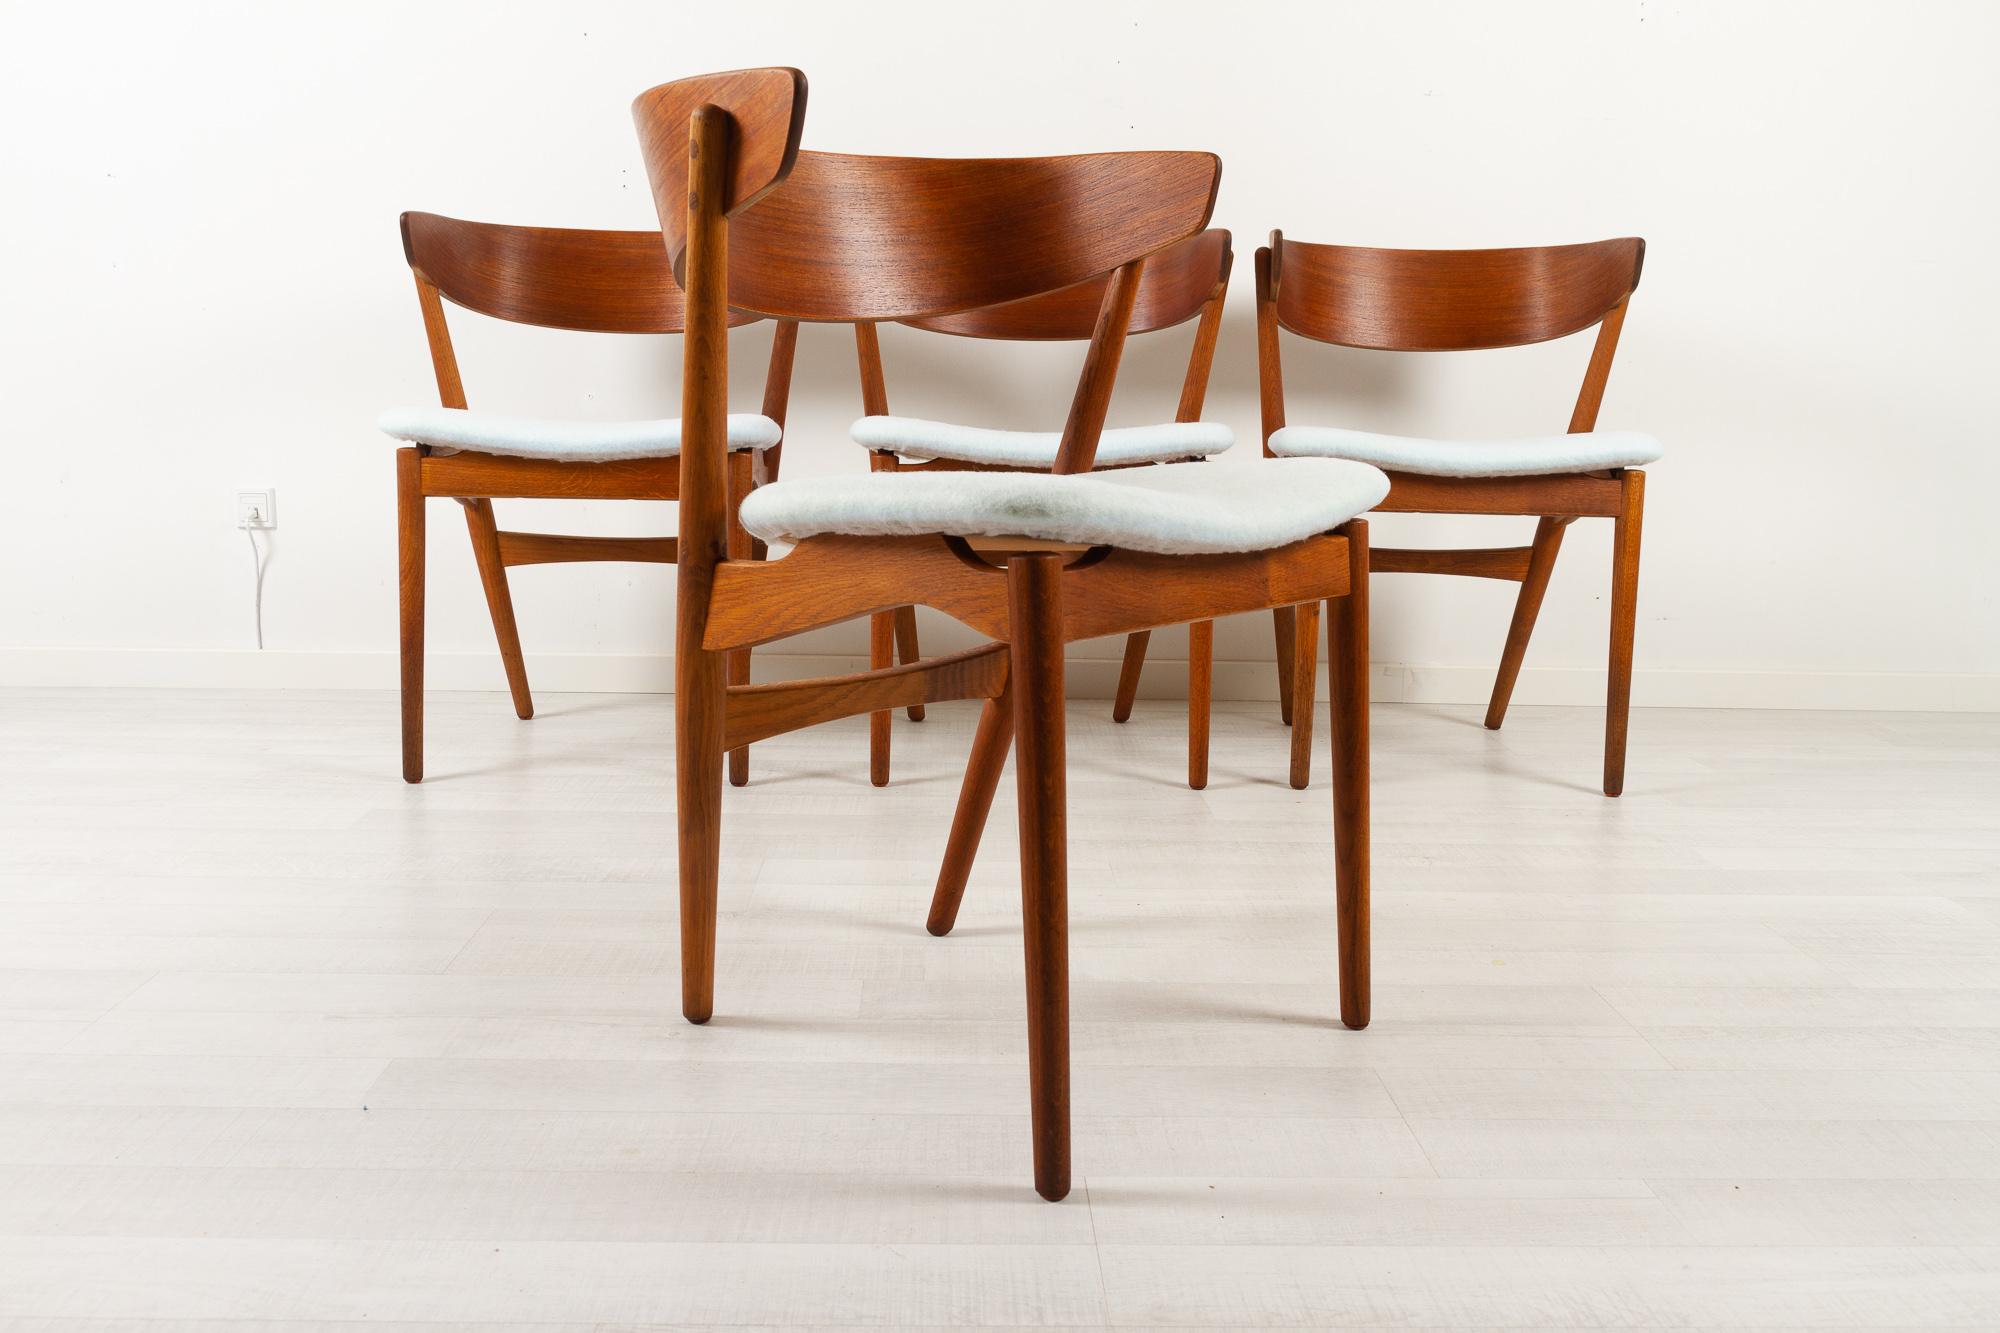 Vintage Danish Teak Dining Chairs No. 7 by Helge Sibast 1960s Set of 4 For Sale 6